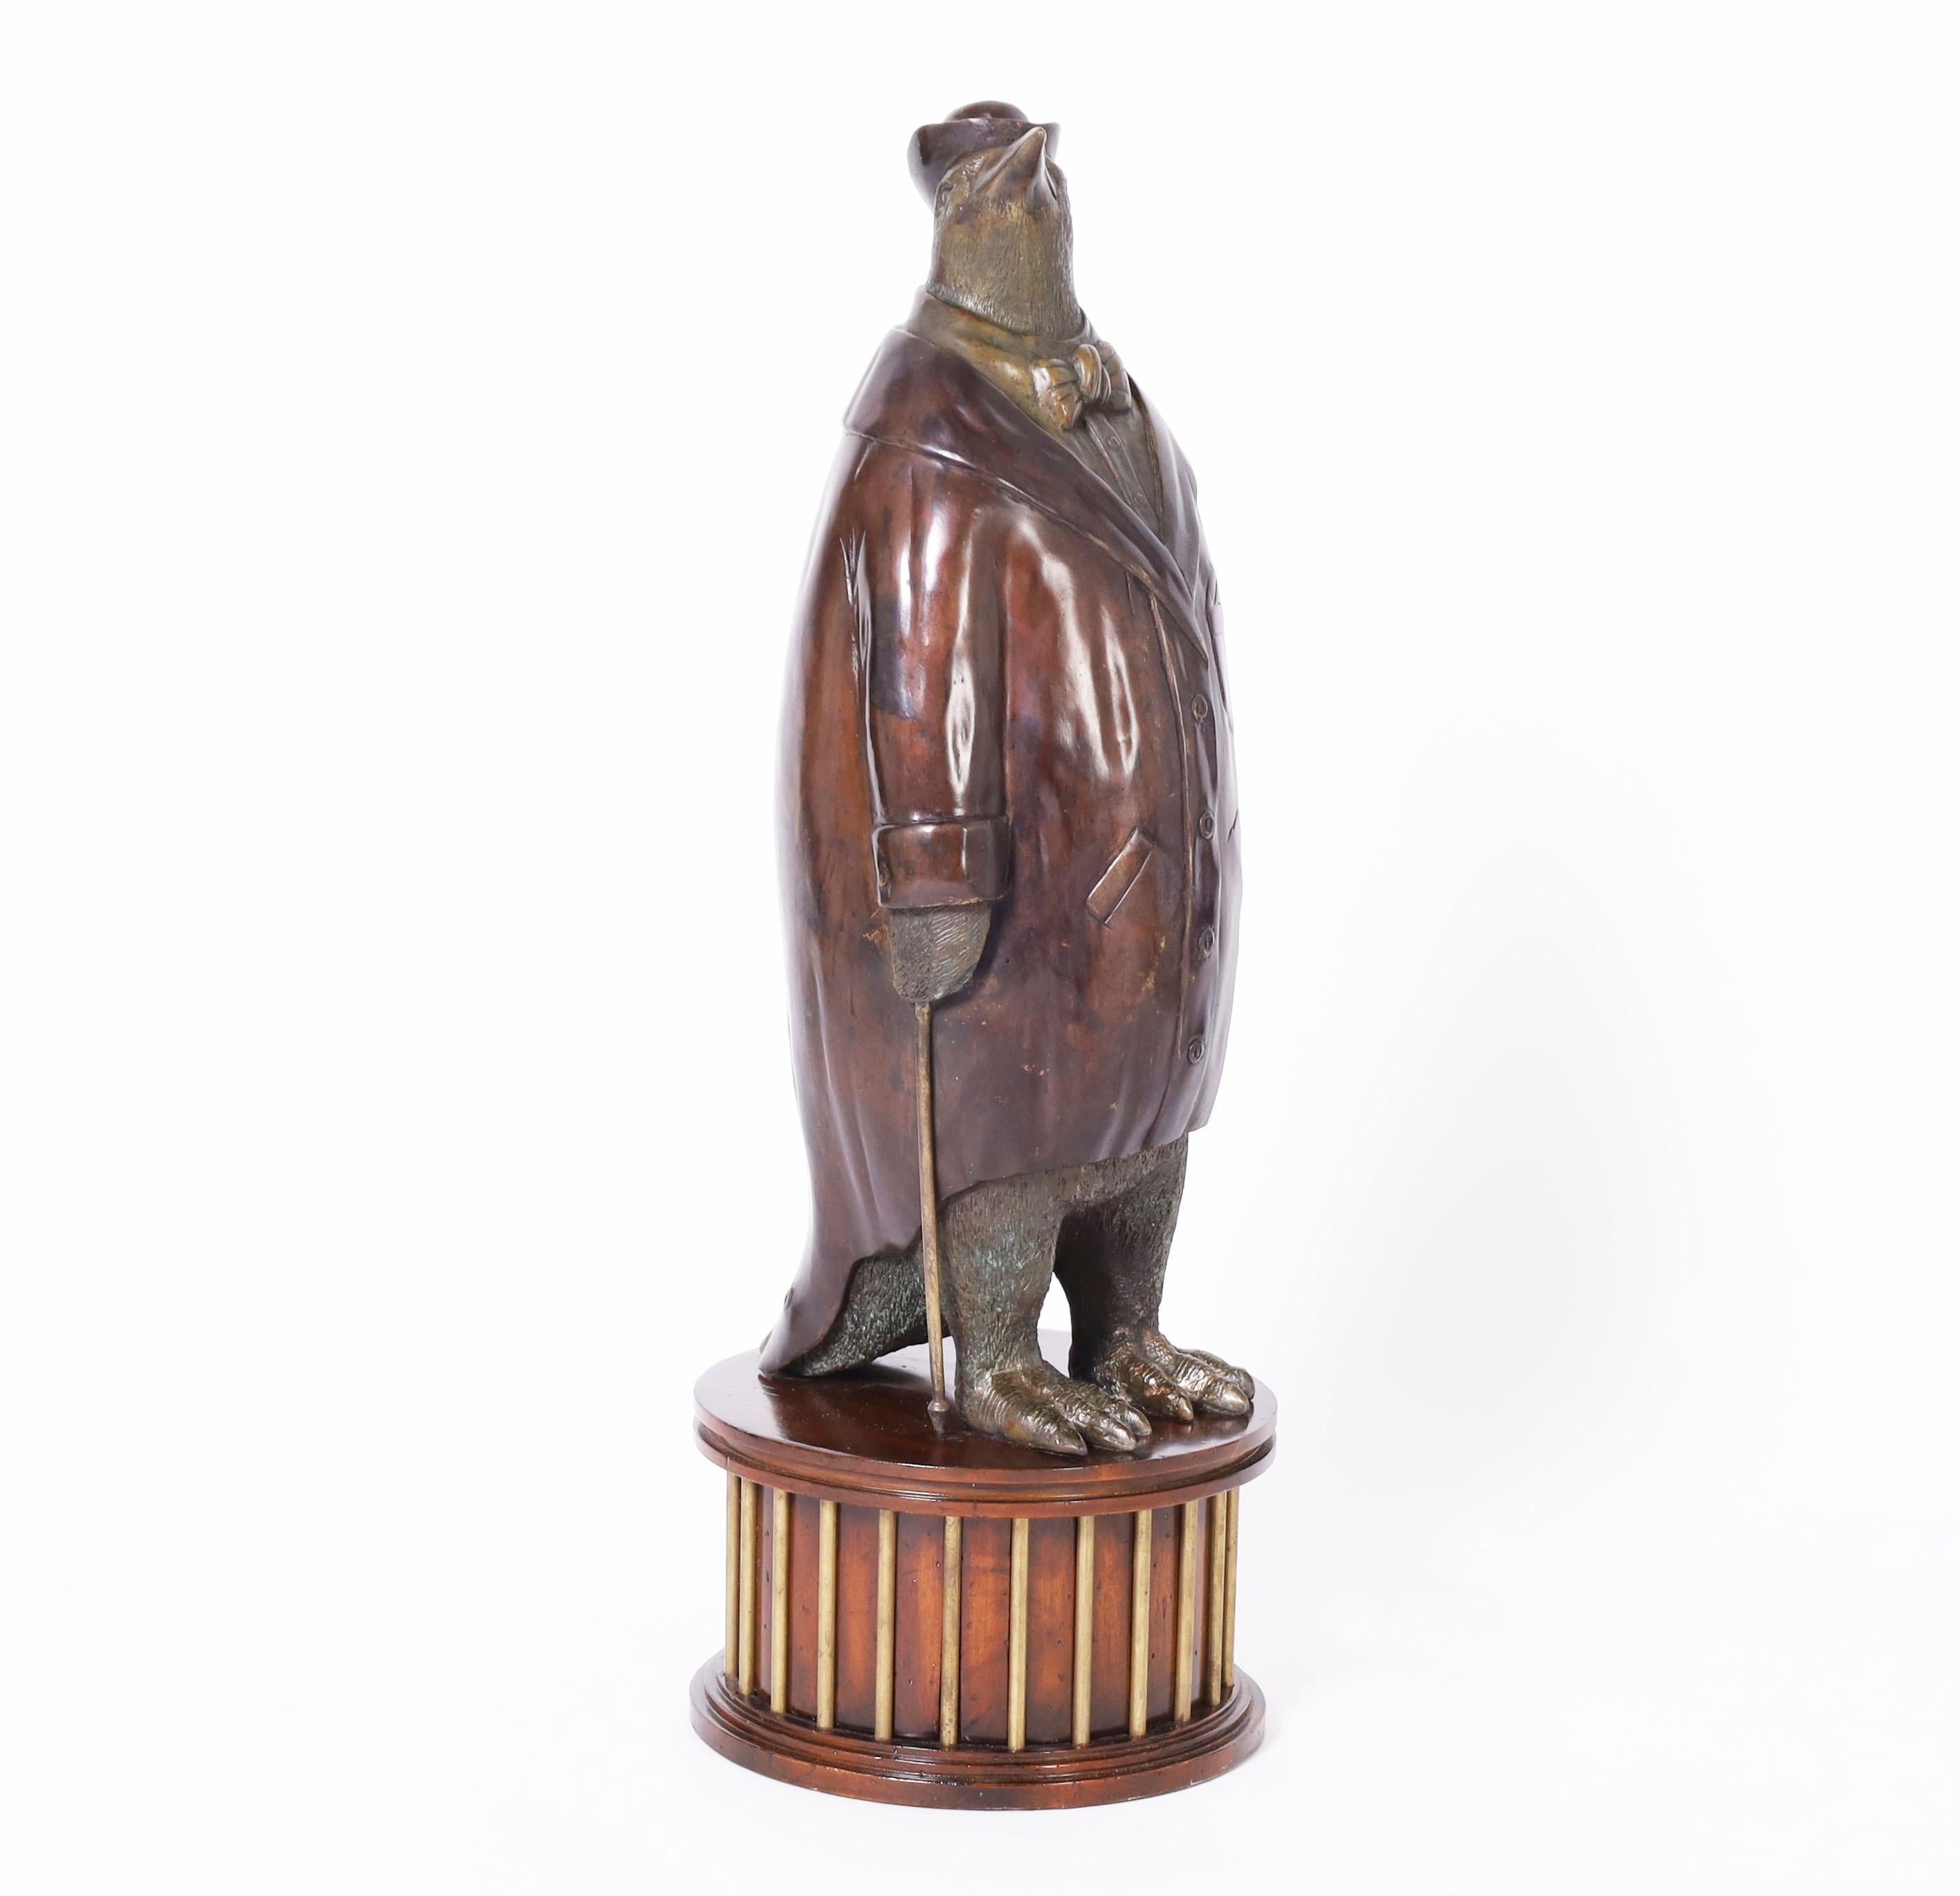 Chinese Vintage Bronze Anthropomorphic Penguin Sculpture by Maitland-Smith